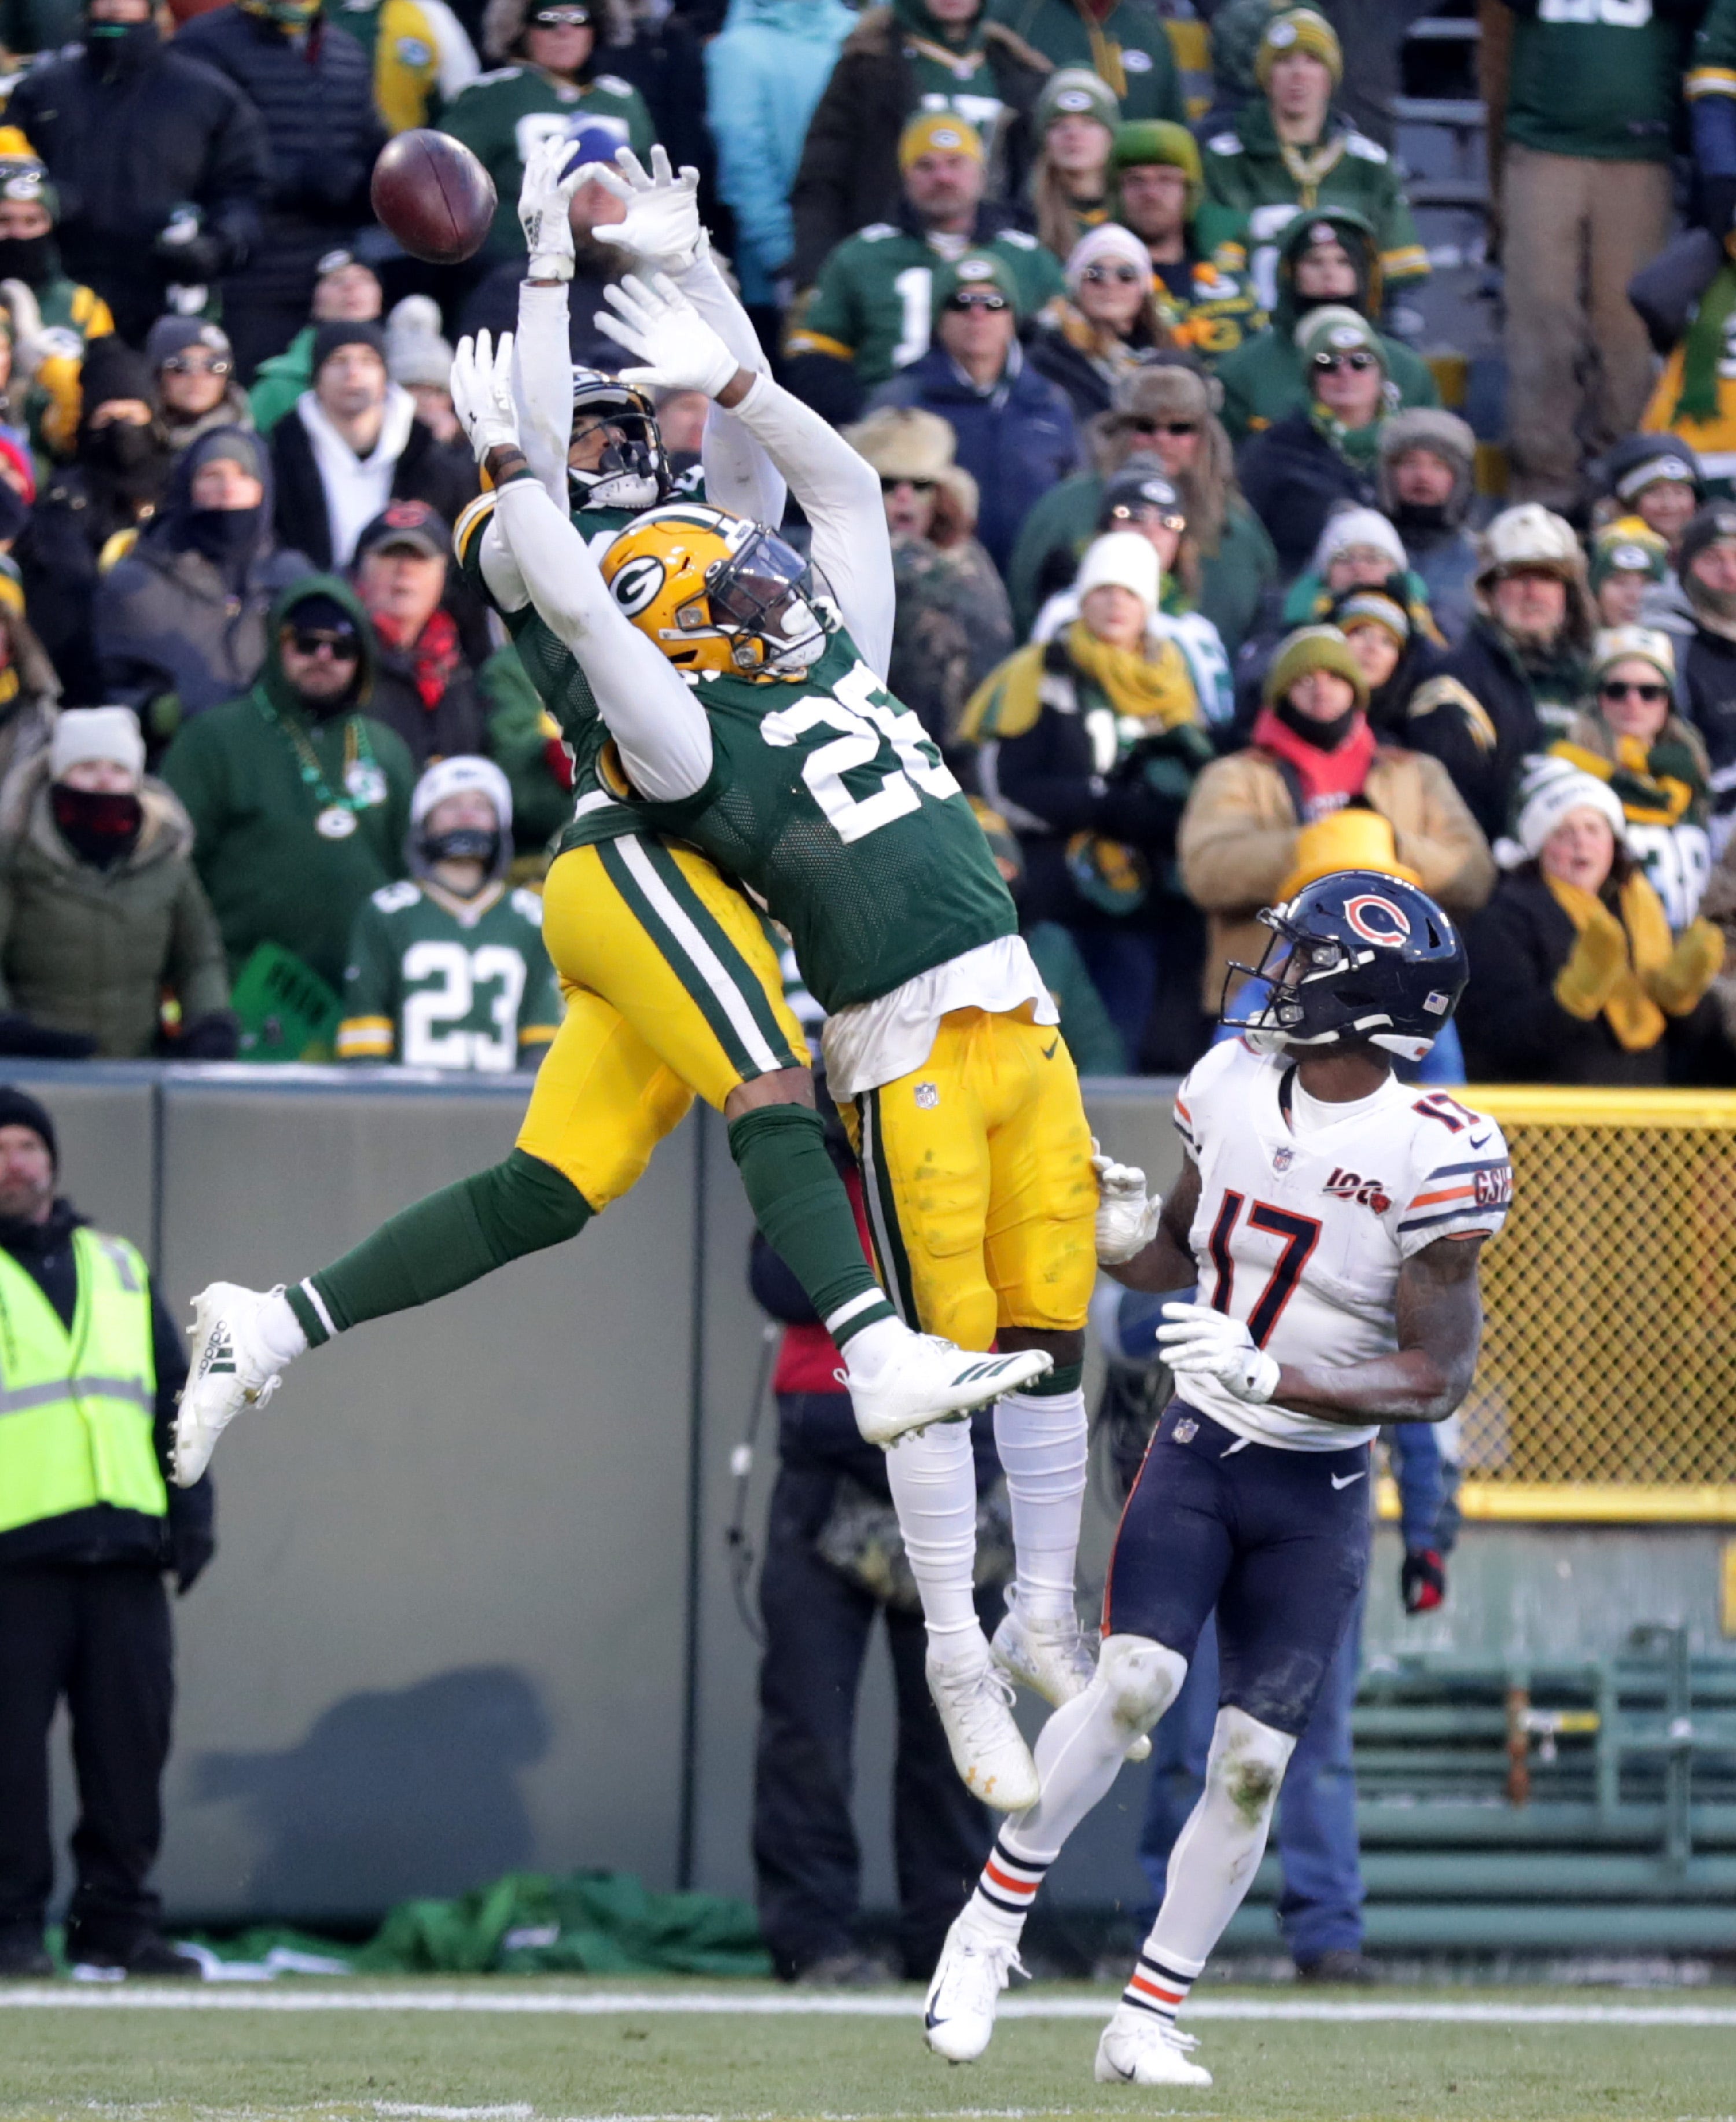 Green Bay Packers cornerback Jaire Alexander (23) and free safety Darnell Savage (26) try to break up a a pass in the end zone intended for Chicago Bears wide receiver Riley Ridley (88) on the final drive during their football game on Sunday, December 15, 2019, at Lambeau Field in Green Bay, Wis.